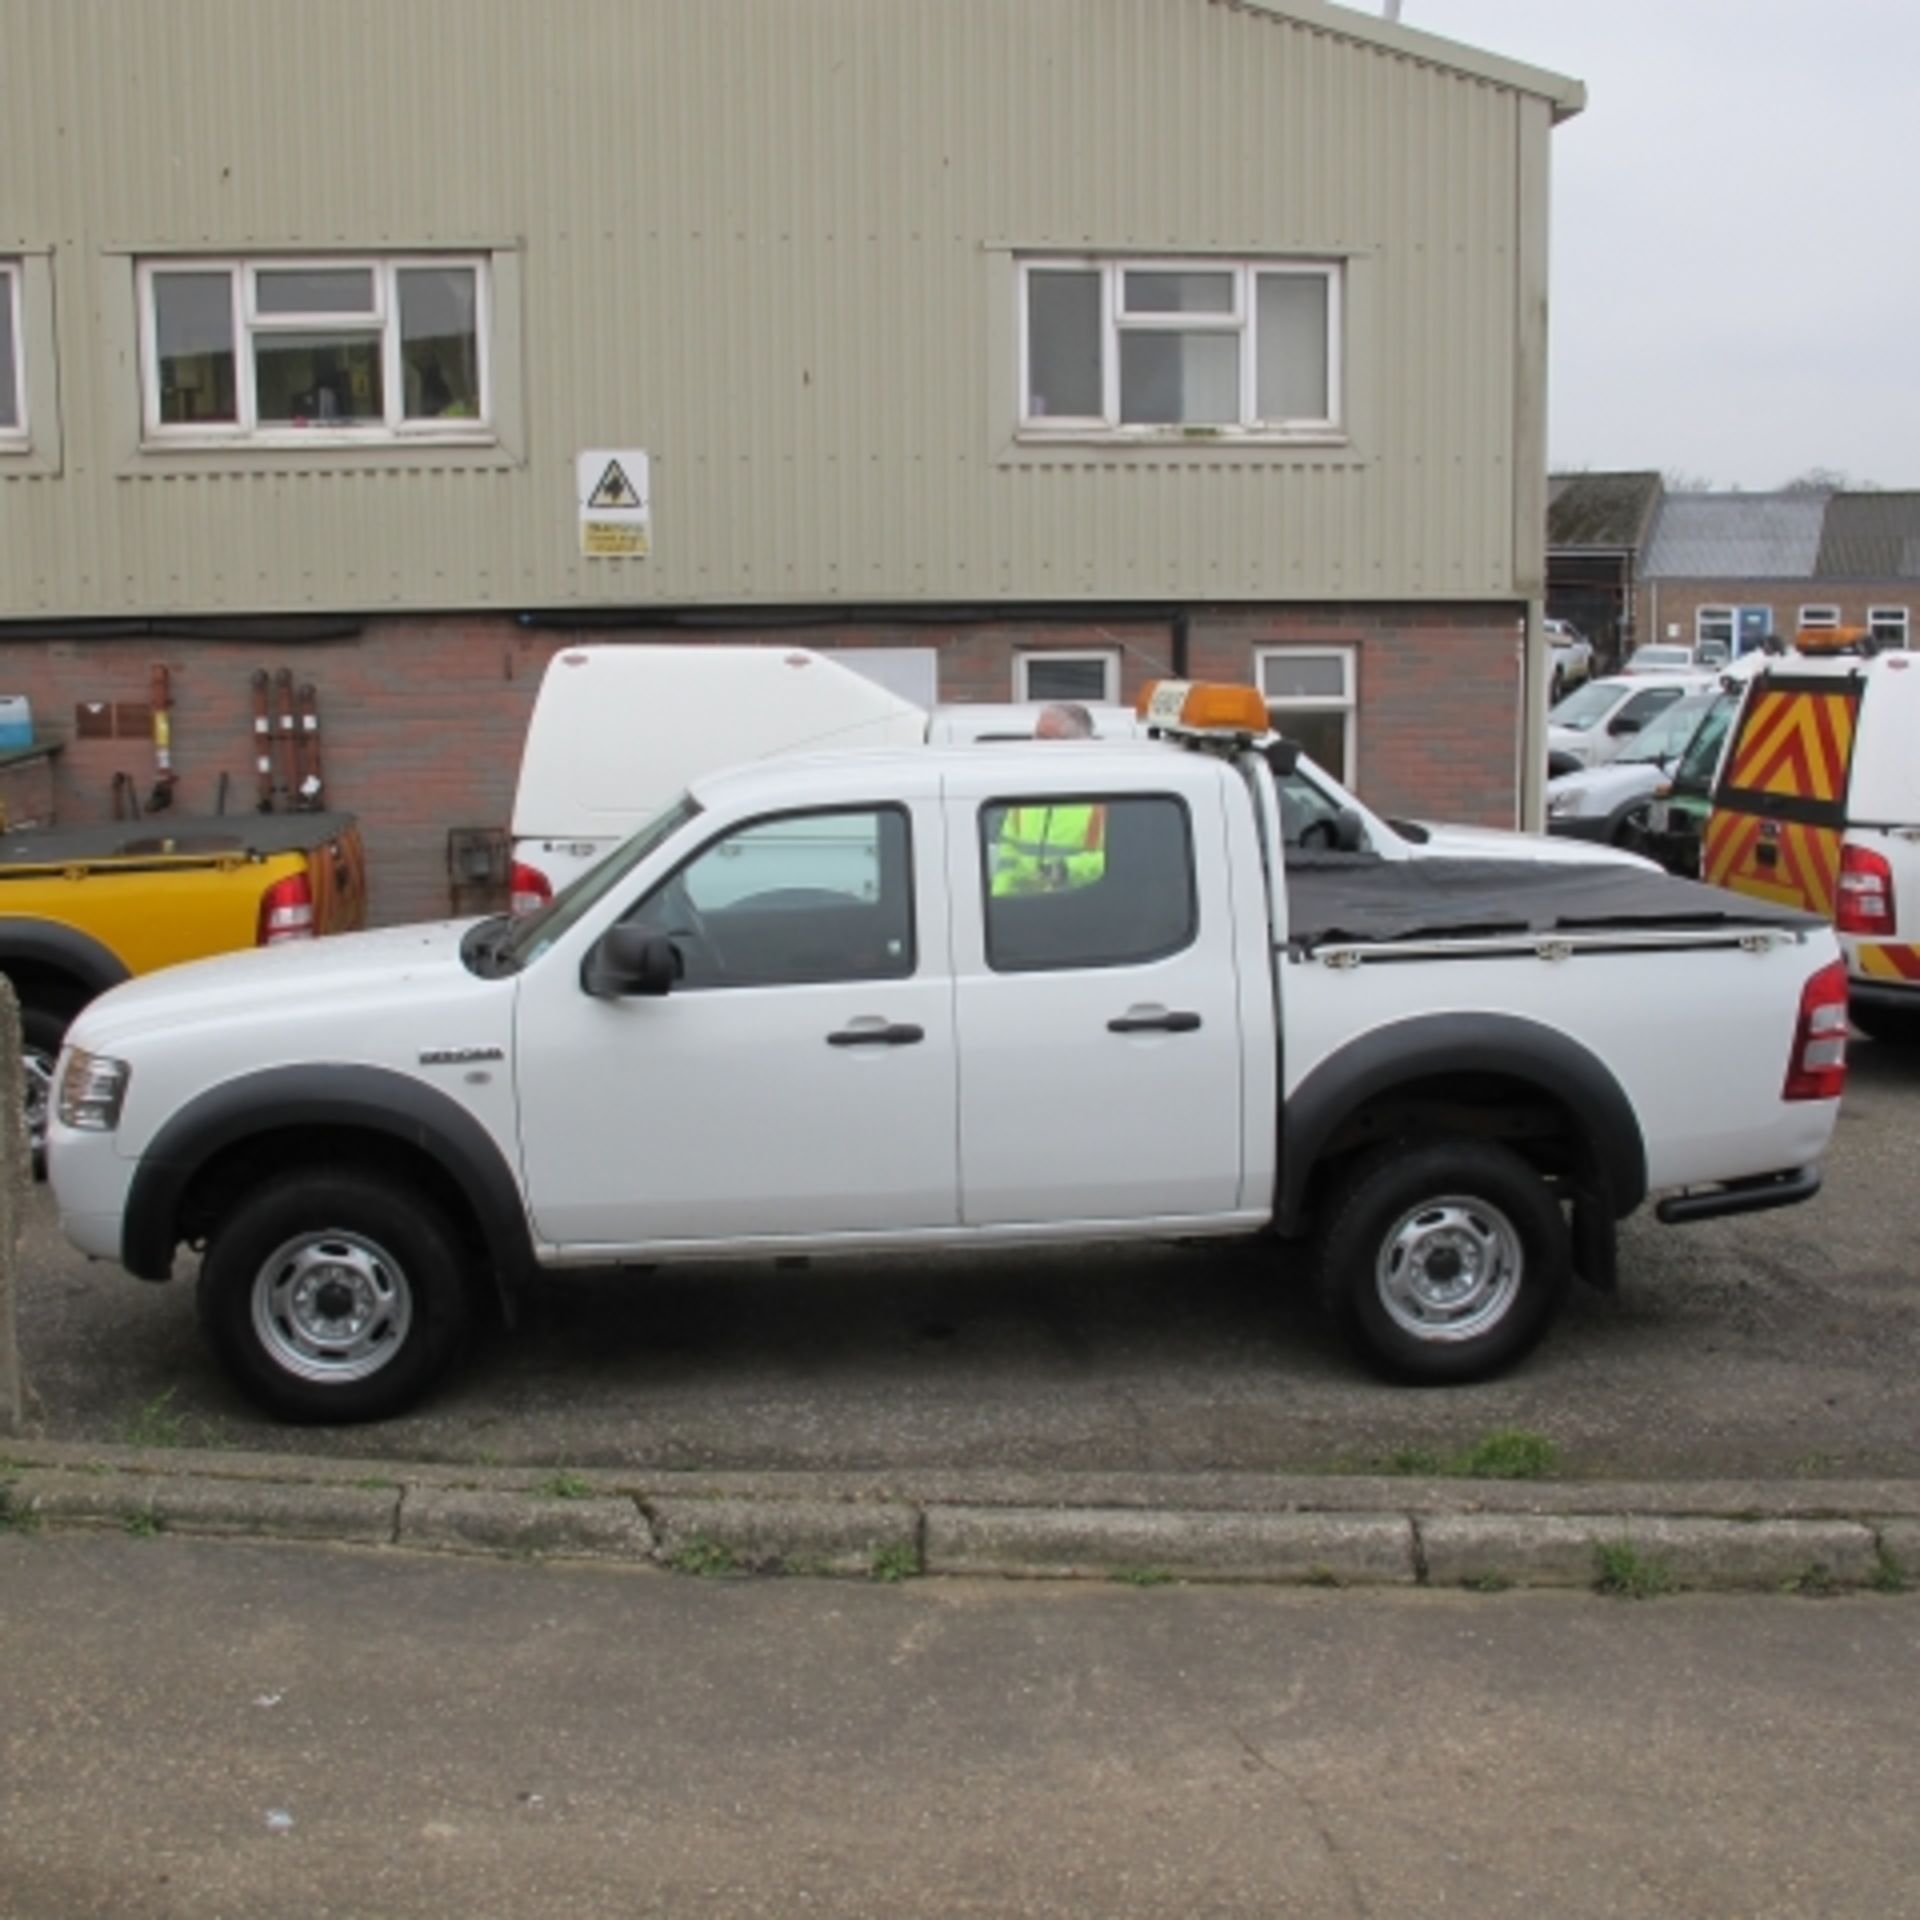 * Ford Ranger 2.5TDCI 4WD Crew Cab Pick up with Rear Sheet Cover & Ball/Pin Hitch, Reg YX07 WDP - Image 2 of 8